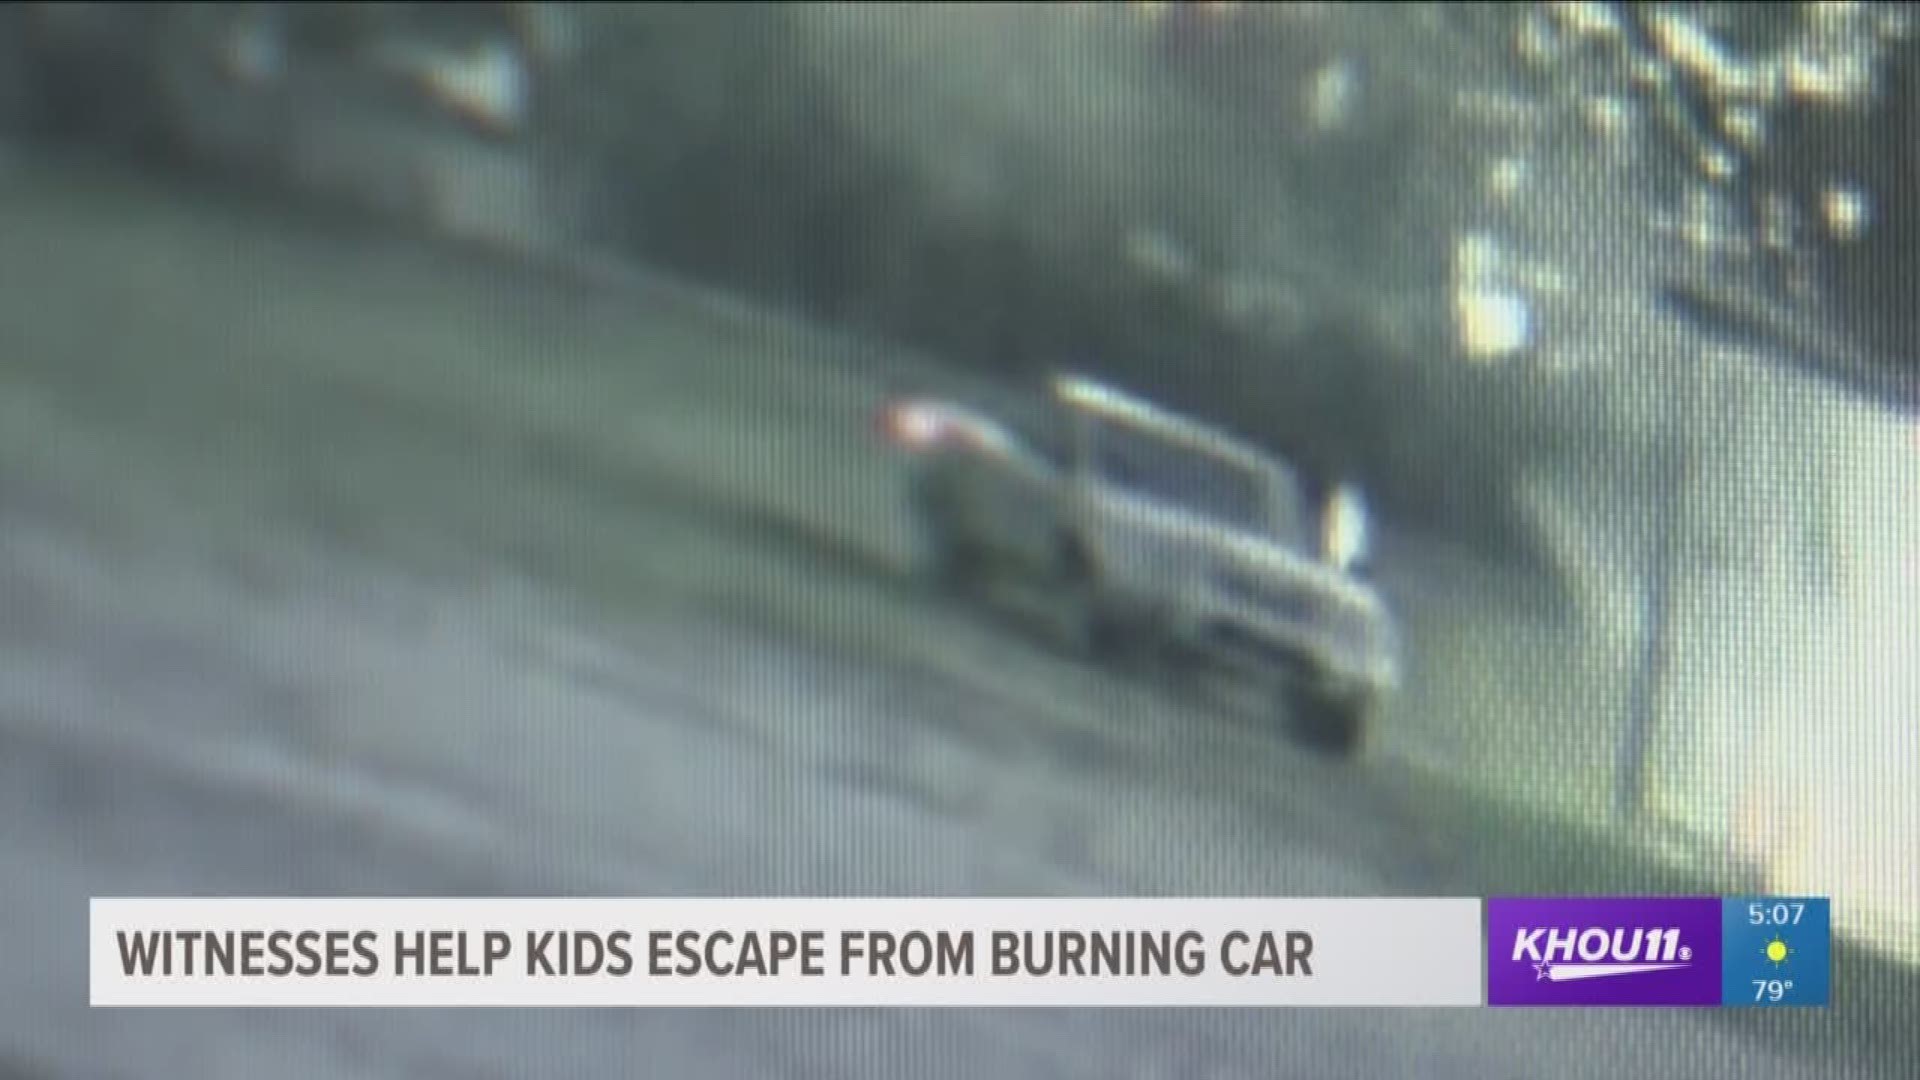 A portion of the incident was captured on surveillance camera. Footage shows the car ignite and slowly more flames begin to build up.